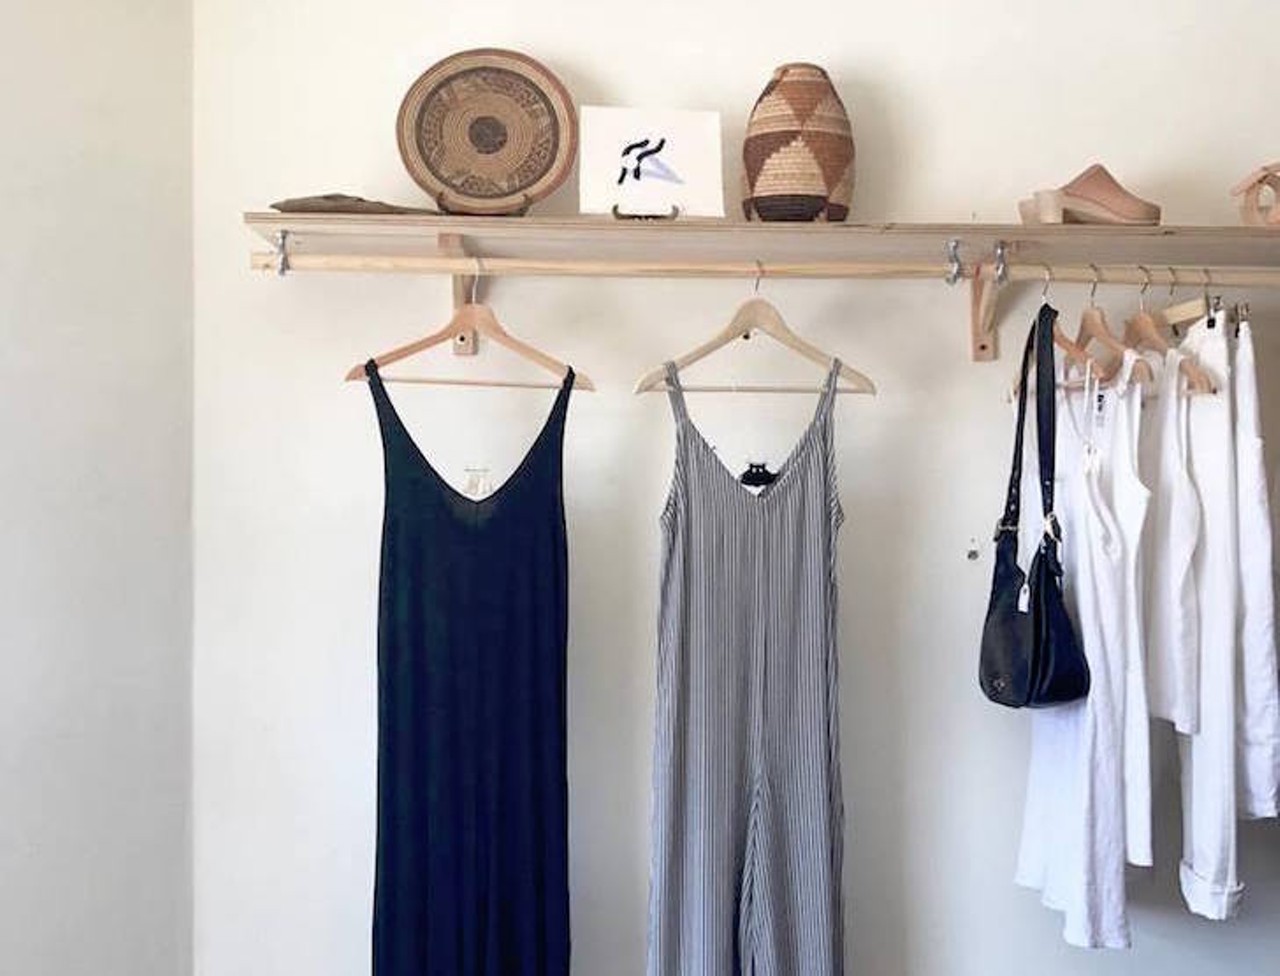 What you&#146;ll find: Simple-meets-bohemian, form-fitting women&#146;s clothing and elegant brass jewelry from local artisans.
Photo via Horizons Vintage/Facebook